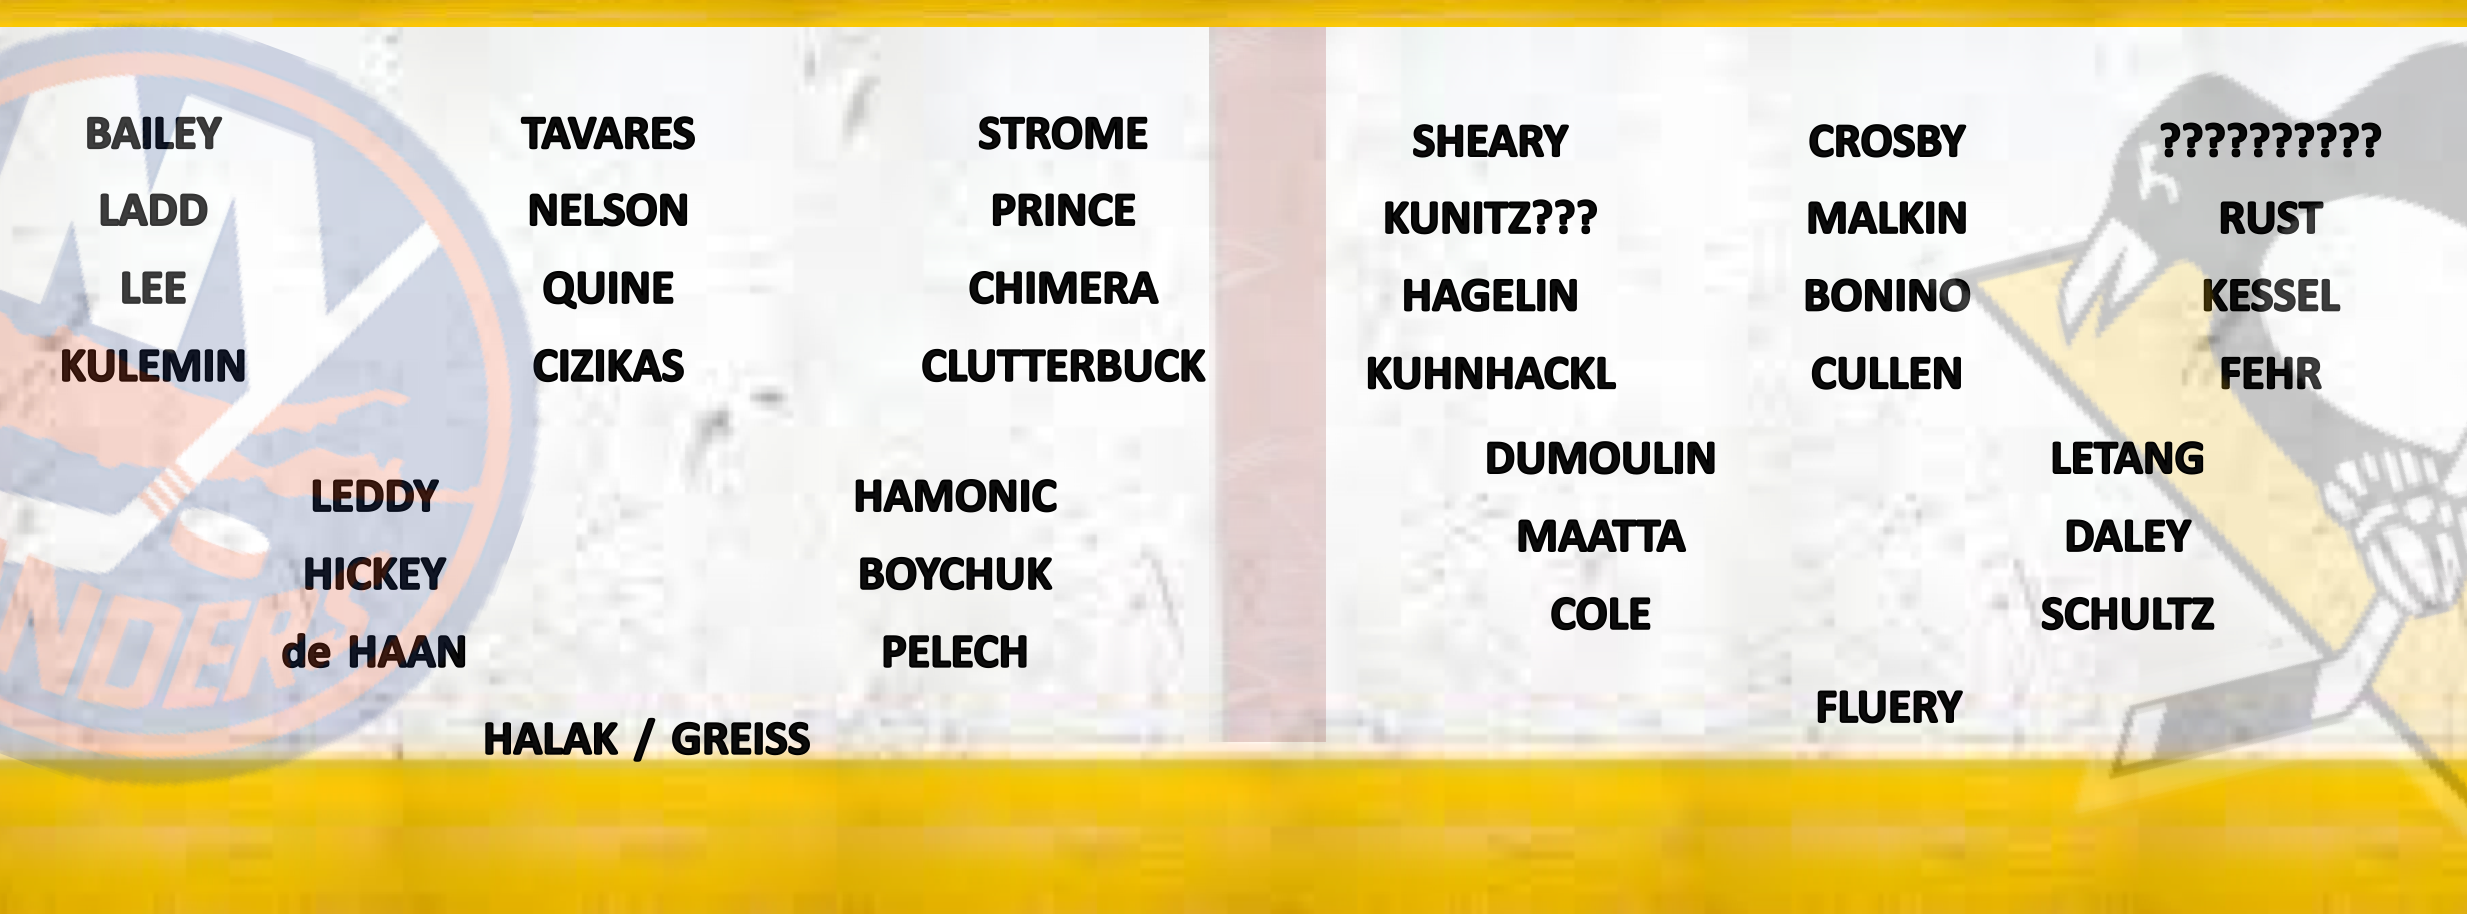 The Penguins lineup is a hot guess right now, I will try to update it around 2 PM based on twitter rumblings.